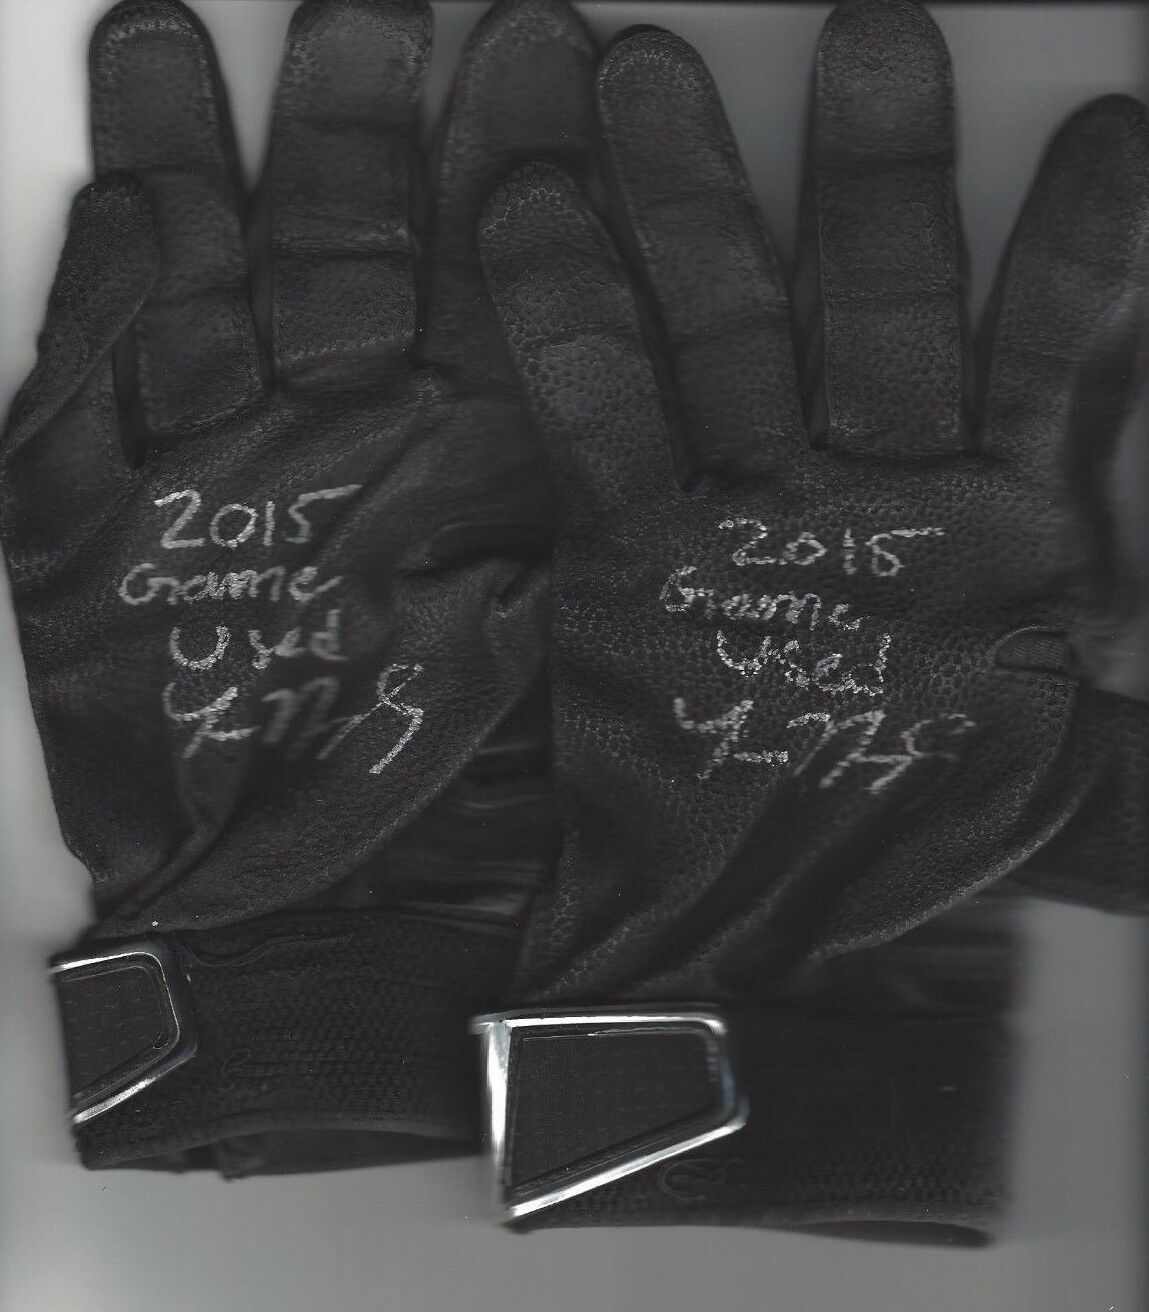 Tom Murphy 2015 Onyx Game Used Batting Gloves Autograph Auto Mariners